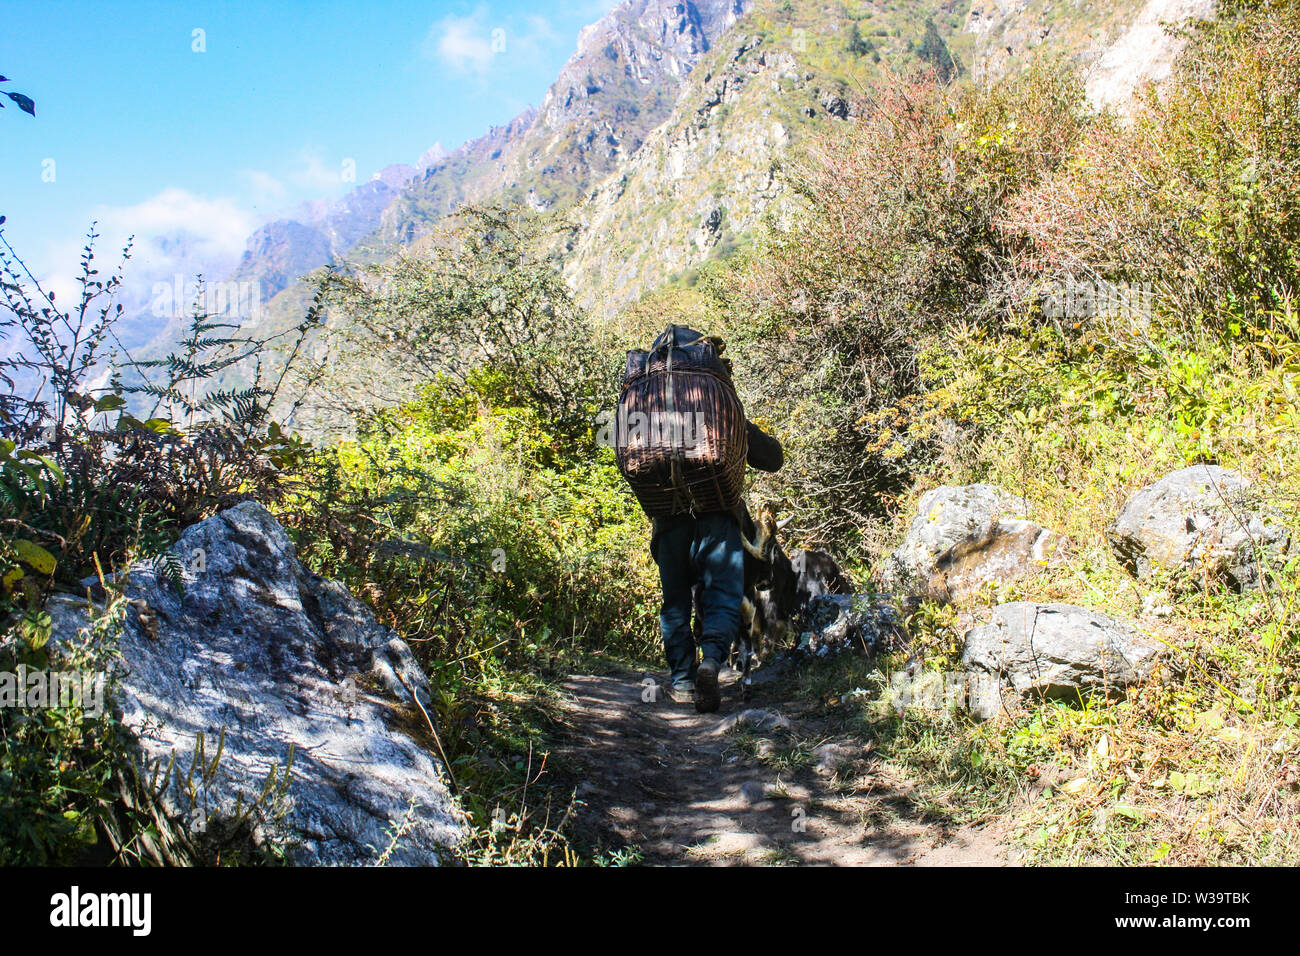 Lifestyles in Himalayan Region of Nepal. Local people carrying goods in their back. Transporting things from town to upper mountain village. Stock Photo